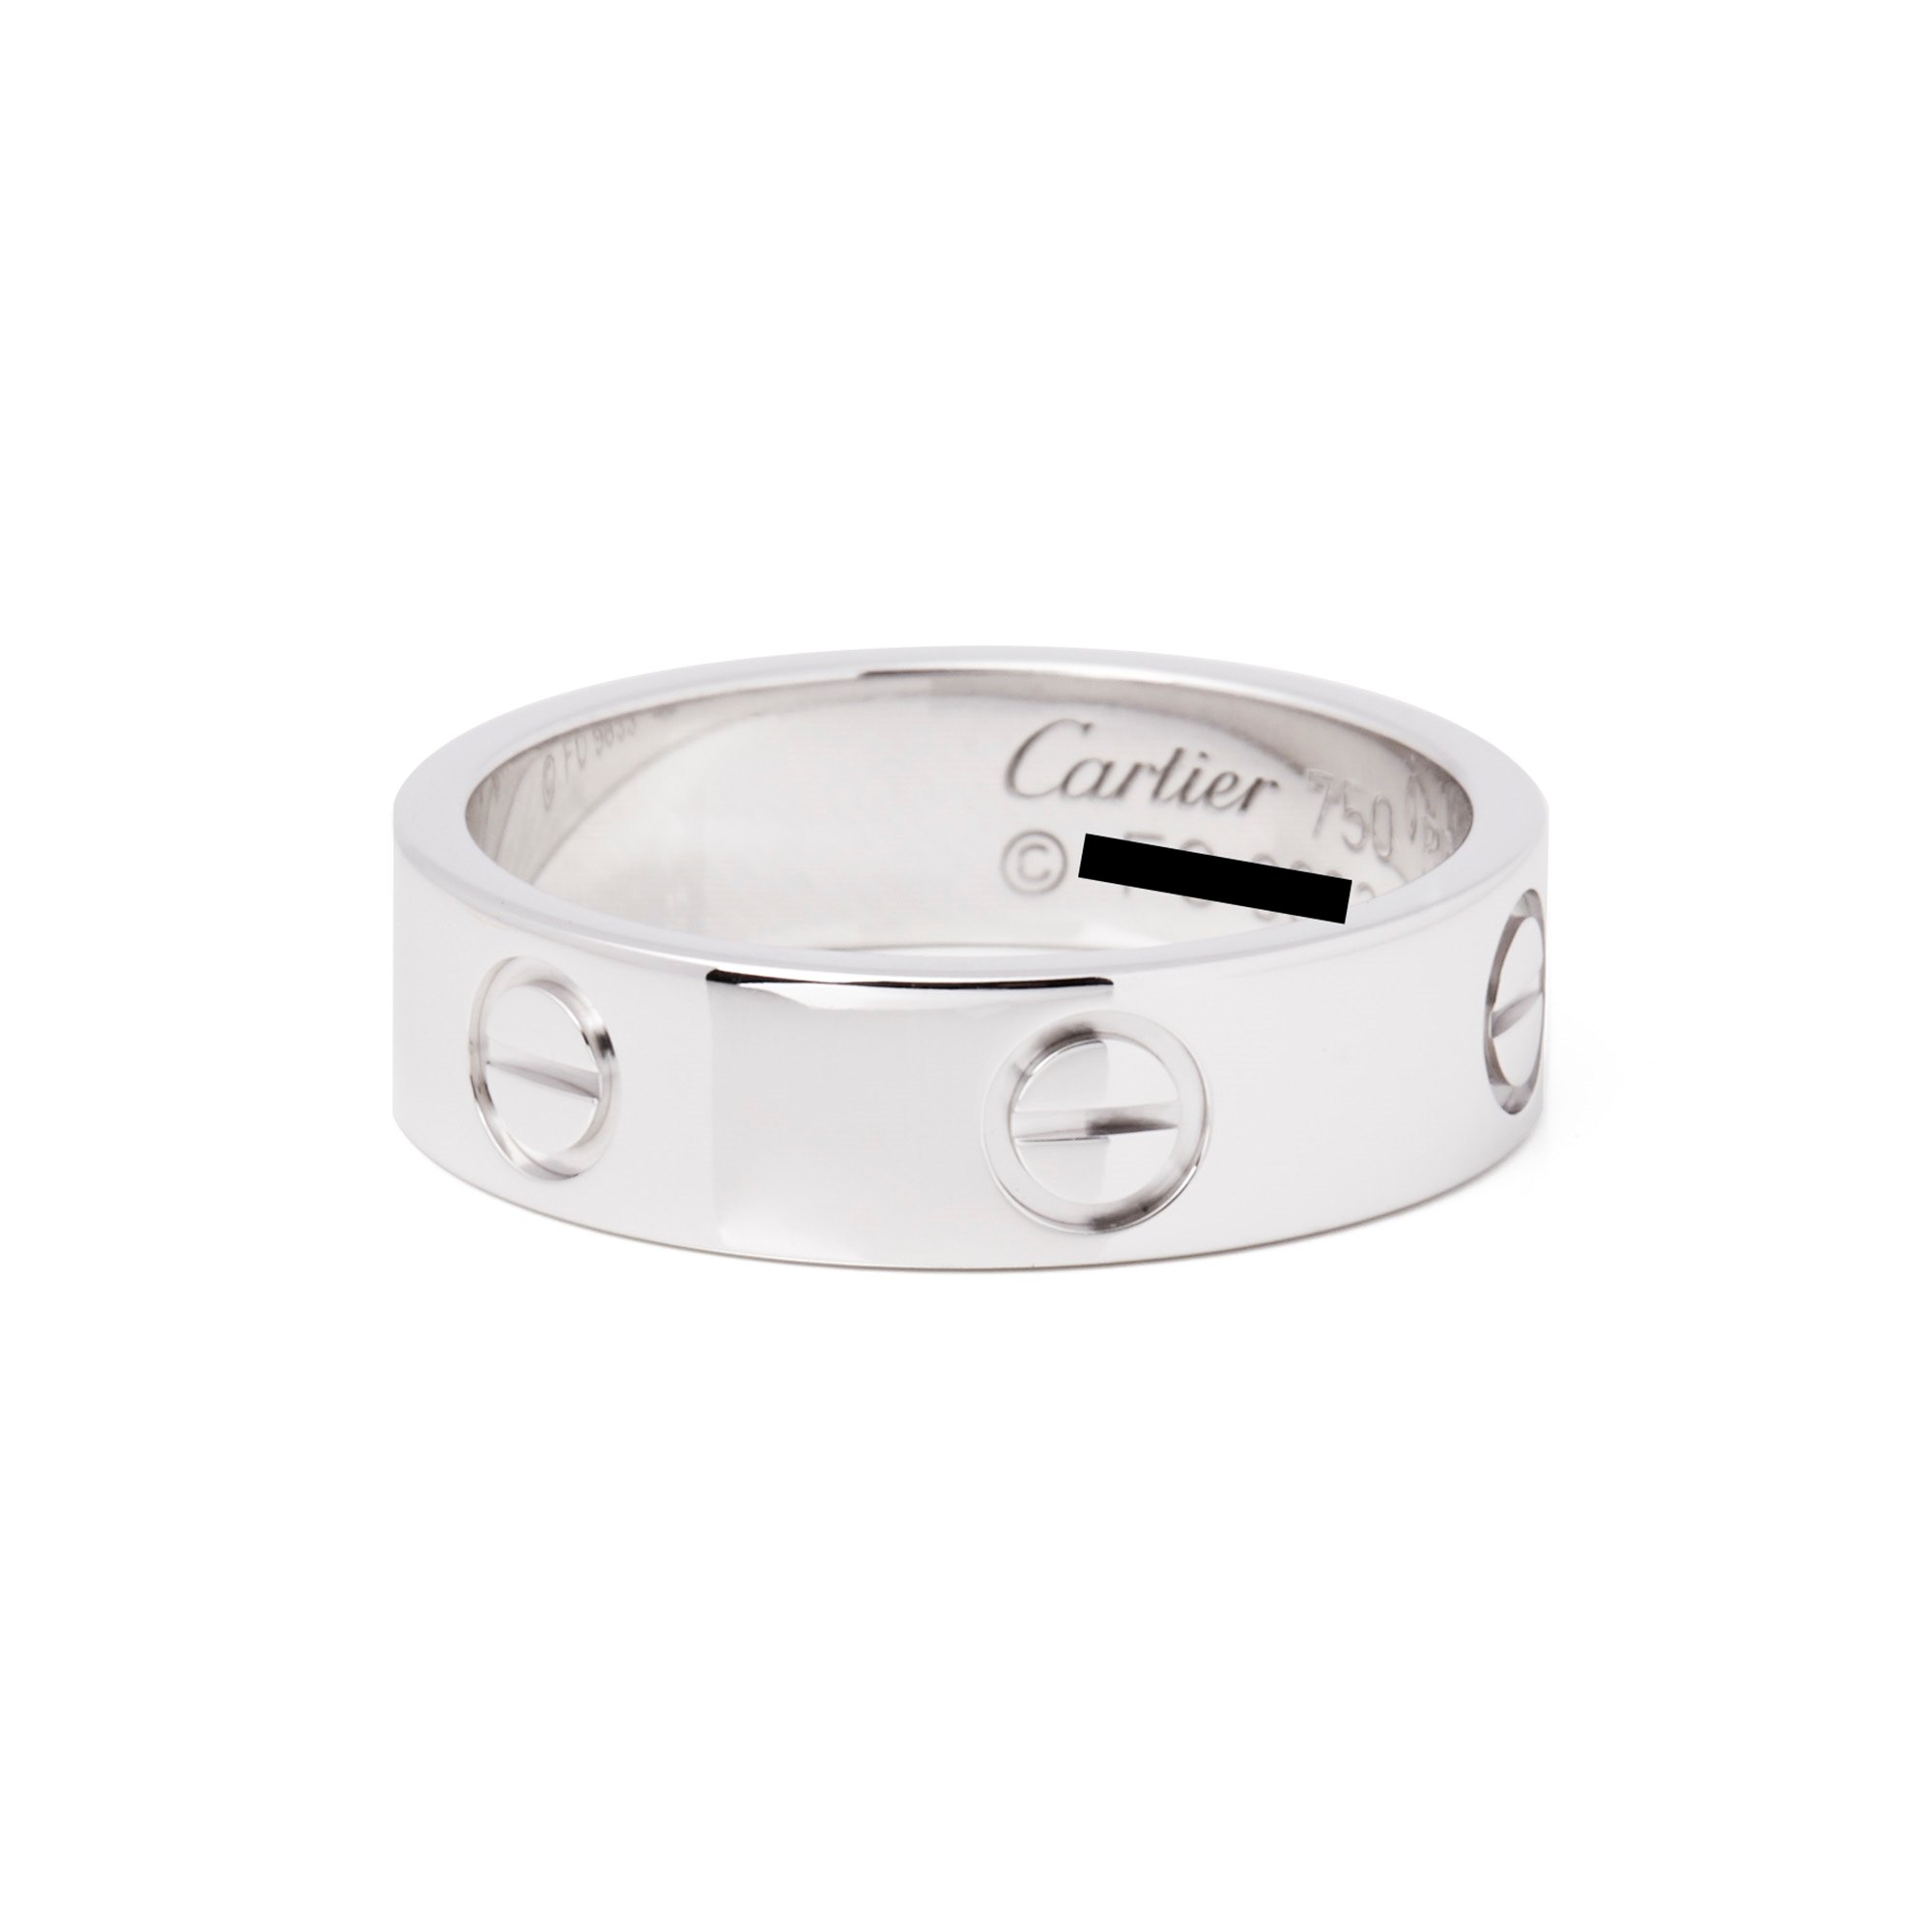 Cartier Love 18ct White Gold Band Ring